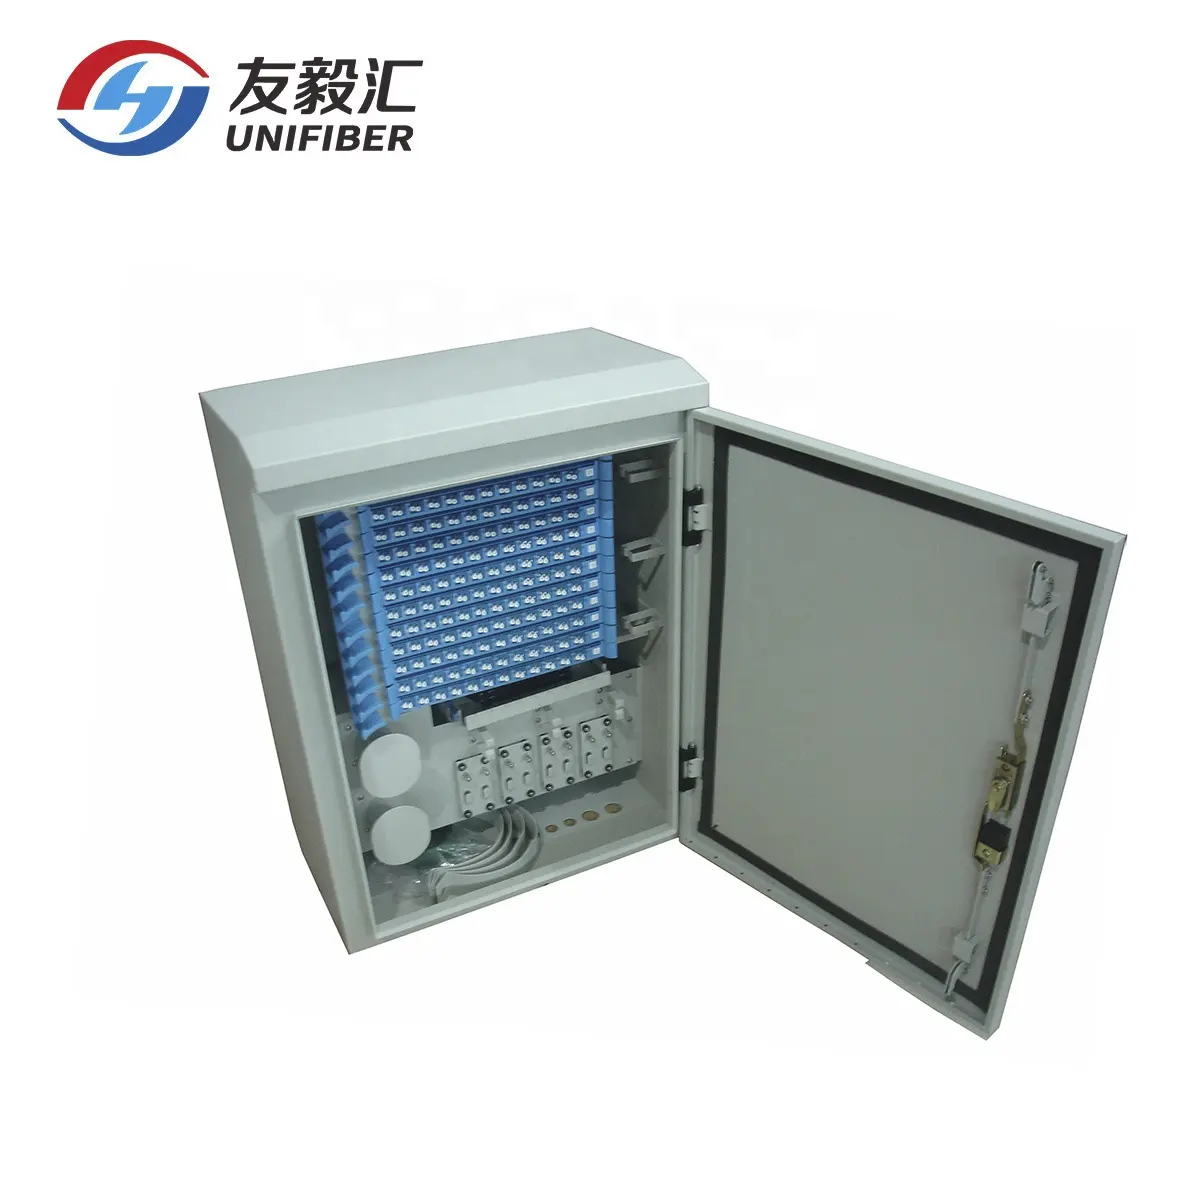 Outdoor Wall Mounted/Pole Mounted Optical Fiber Cabinet, 144 Core Outdoor Fiber Optic Cross-Connection ODF Cabinet